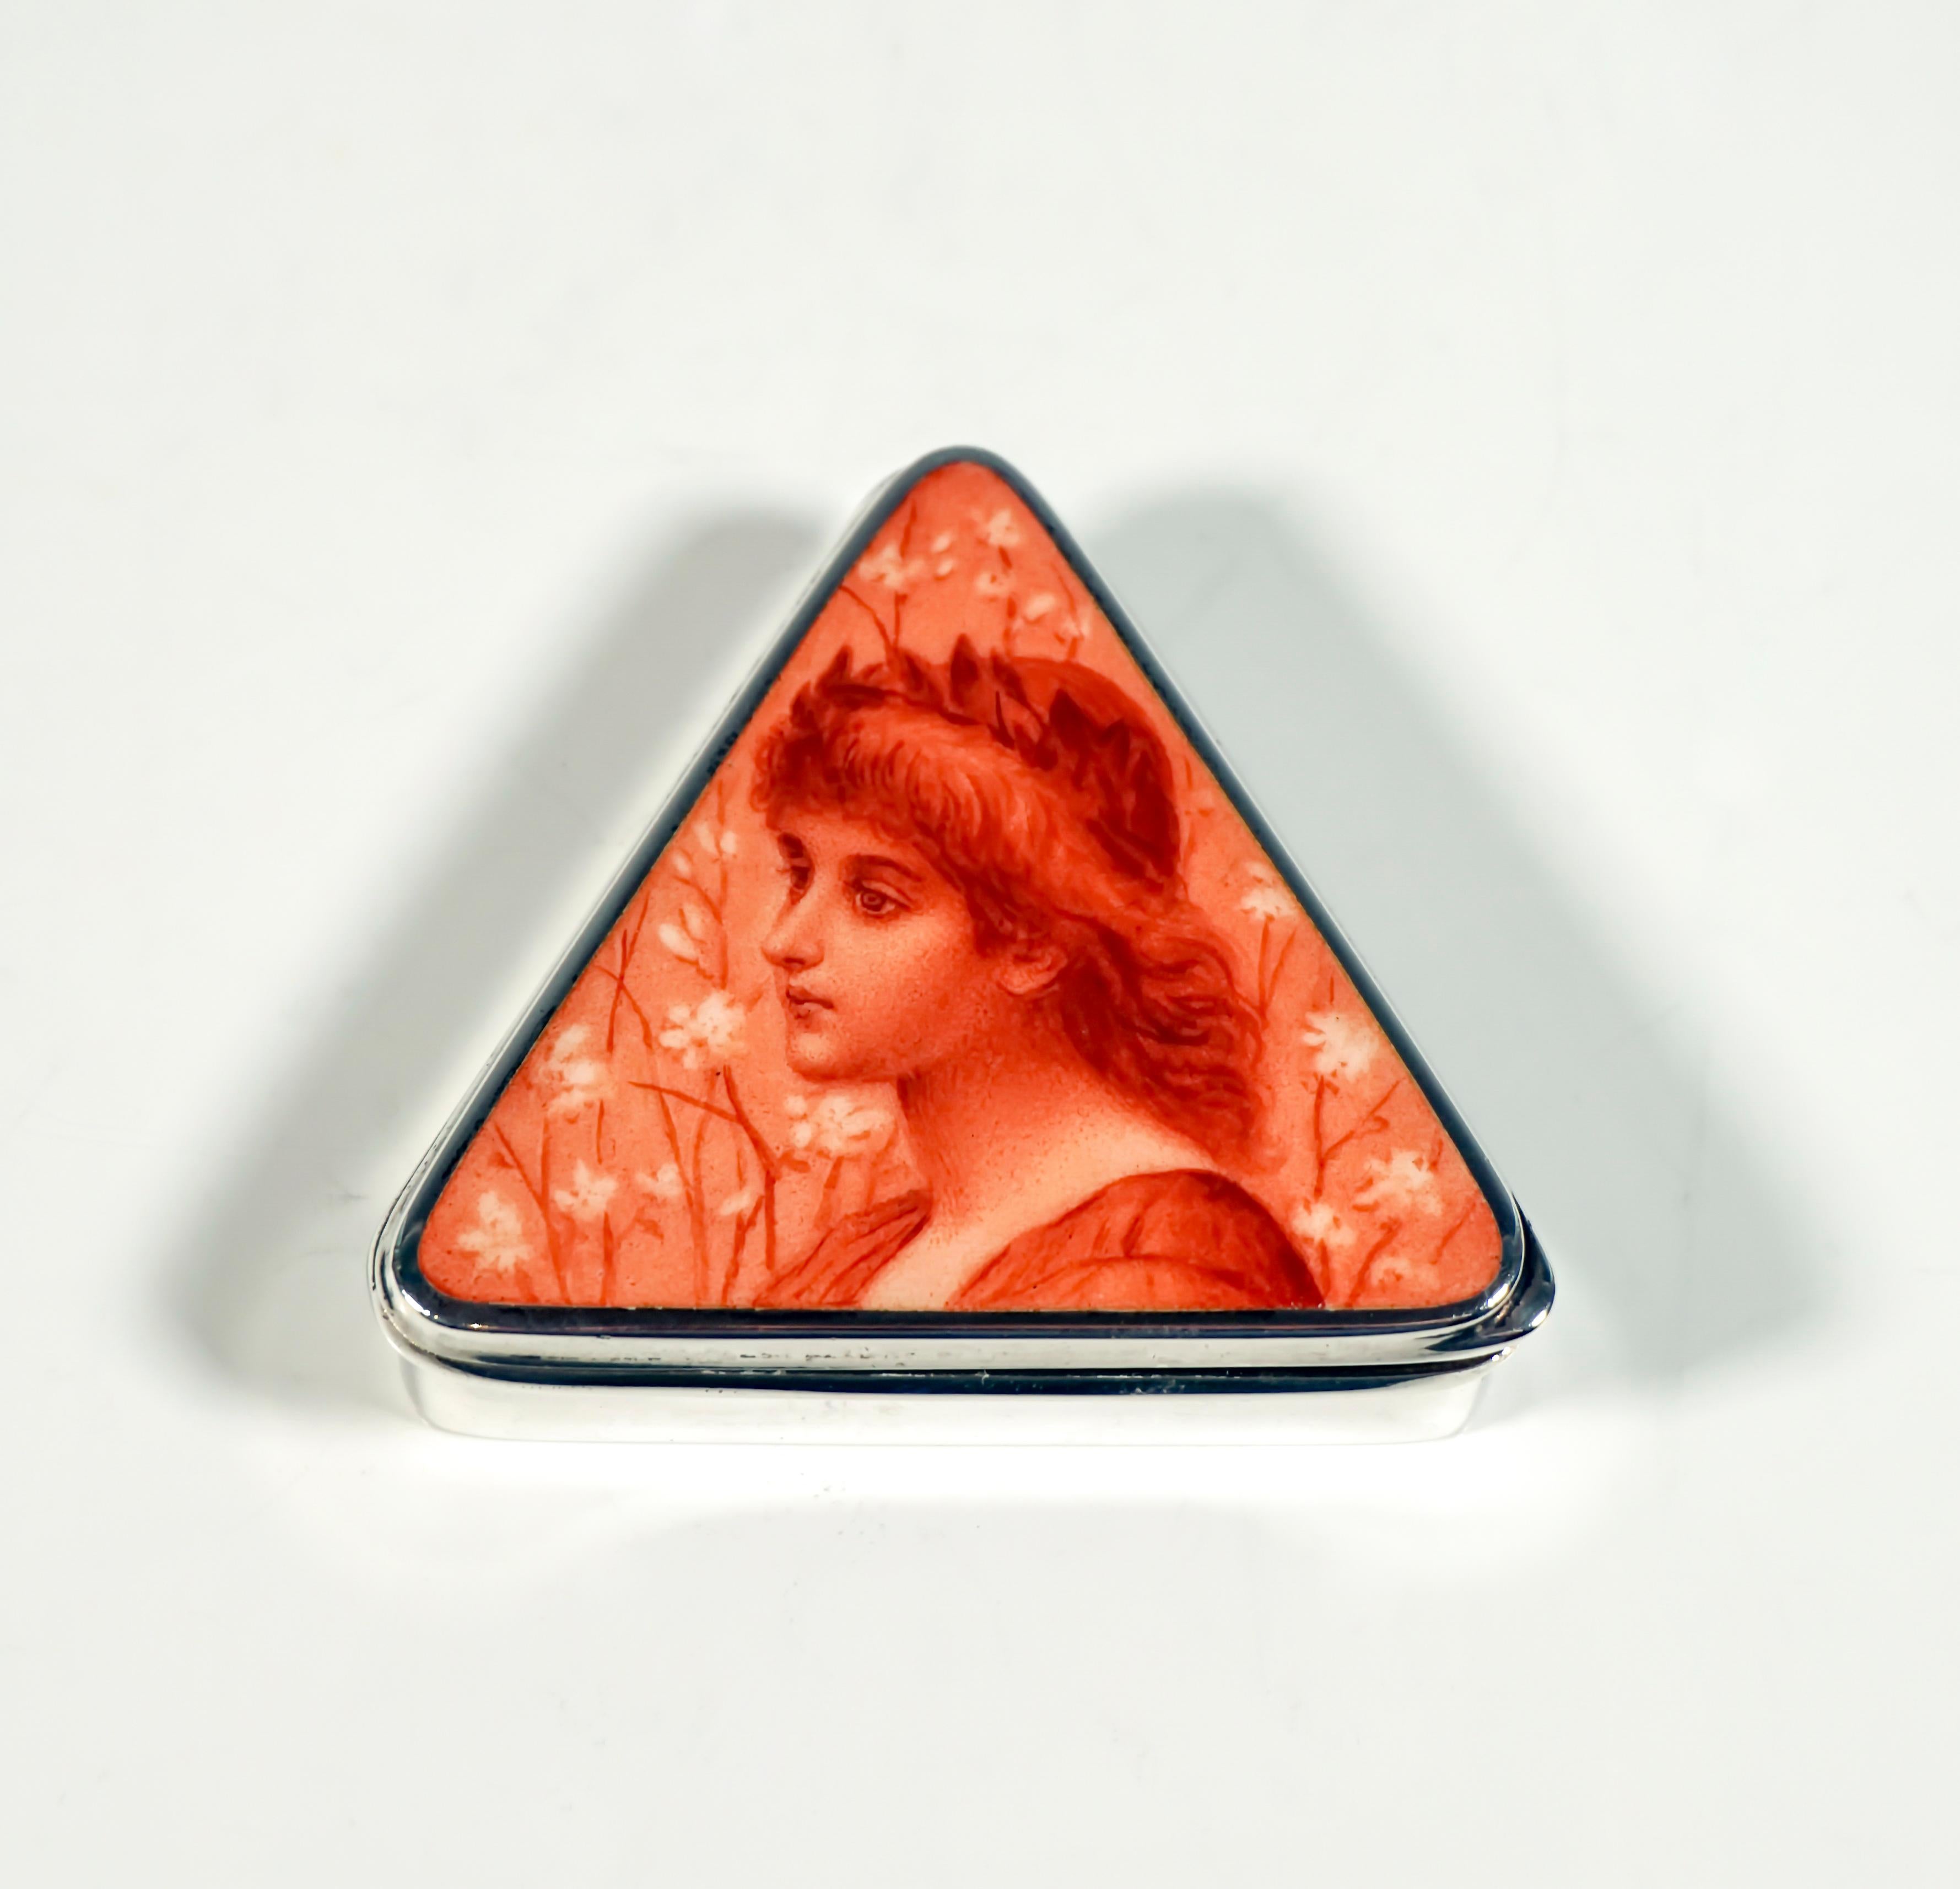 Exquisite Austrian Art-Nouveau silver box, Around 1900:
Triangular silver pill box in a smooth finish with a hinged lid, on the top camaieu enamel painting in iron red: Portrait of a girl with a laurel wreath, opening at the lower right corner,